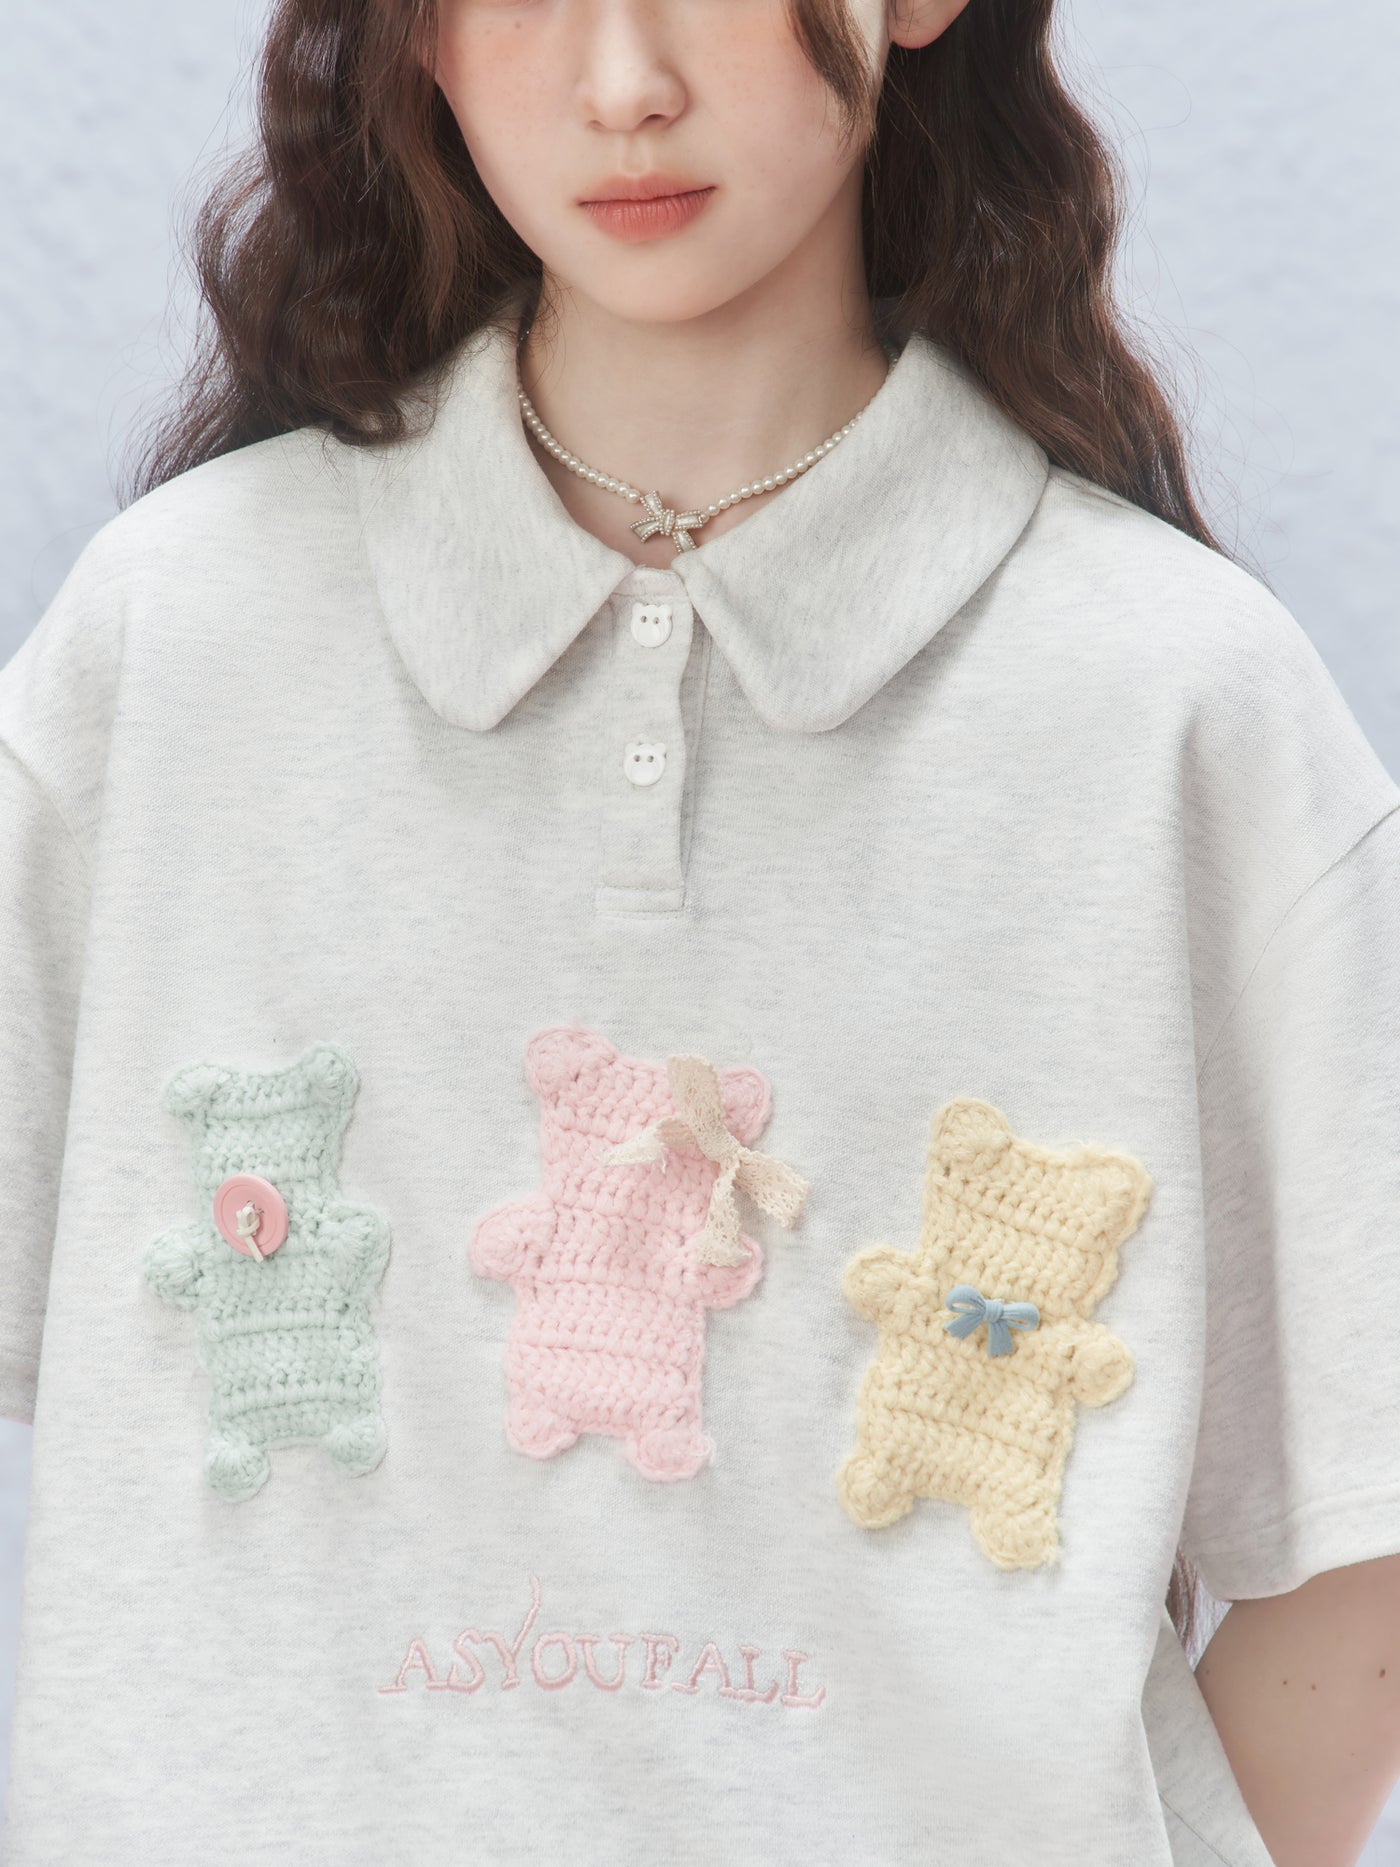 Girly Polo Shirt with Bear Embroidery AYF0027